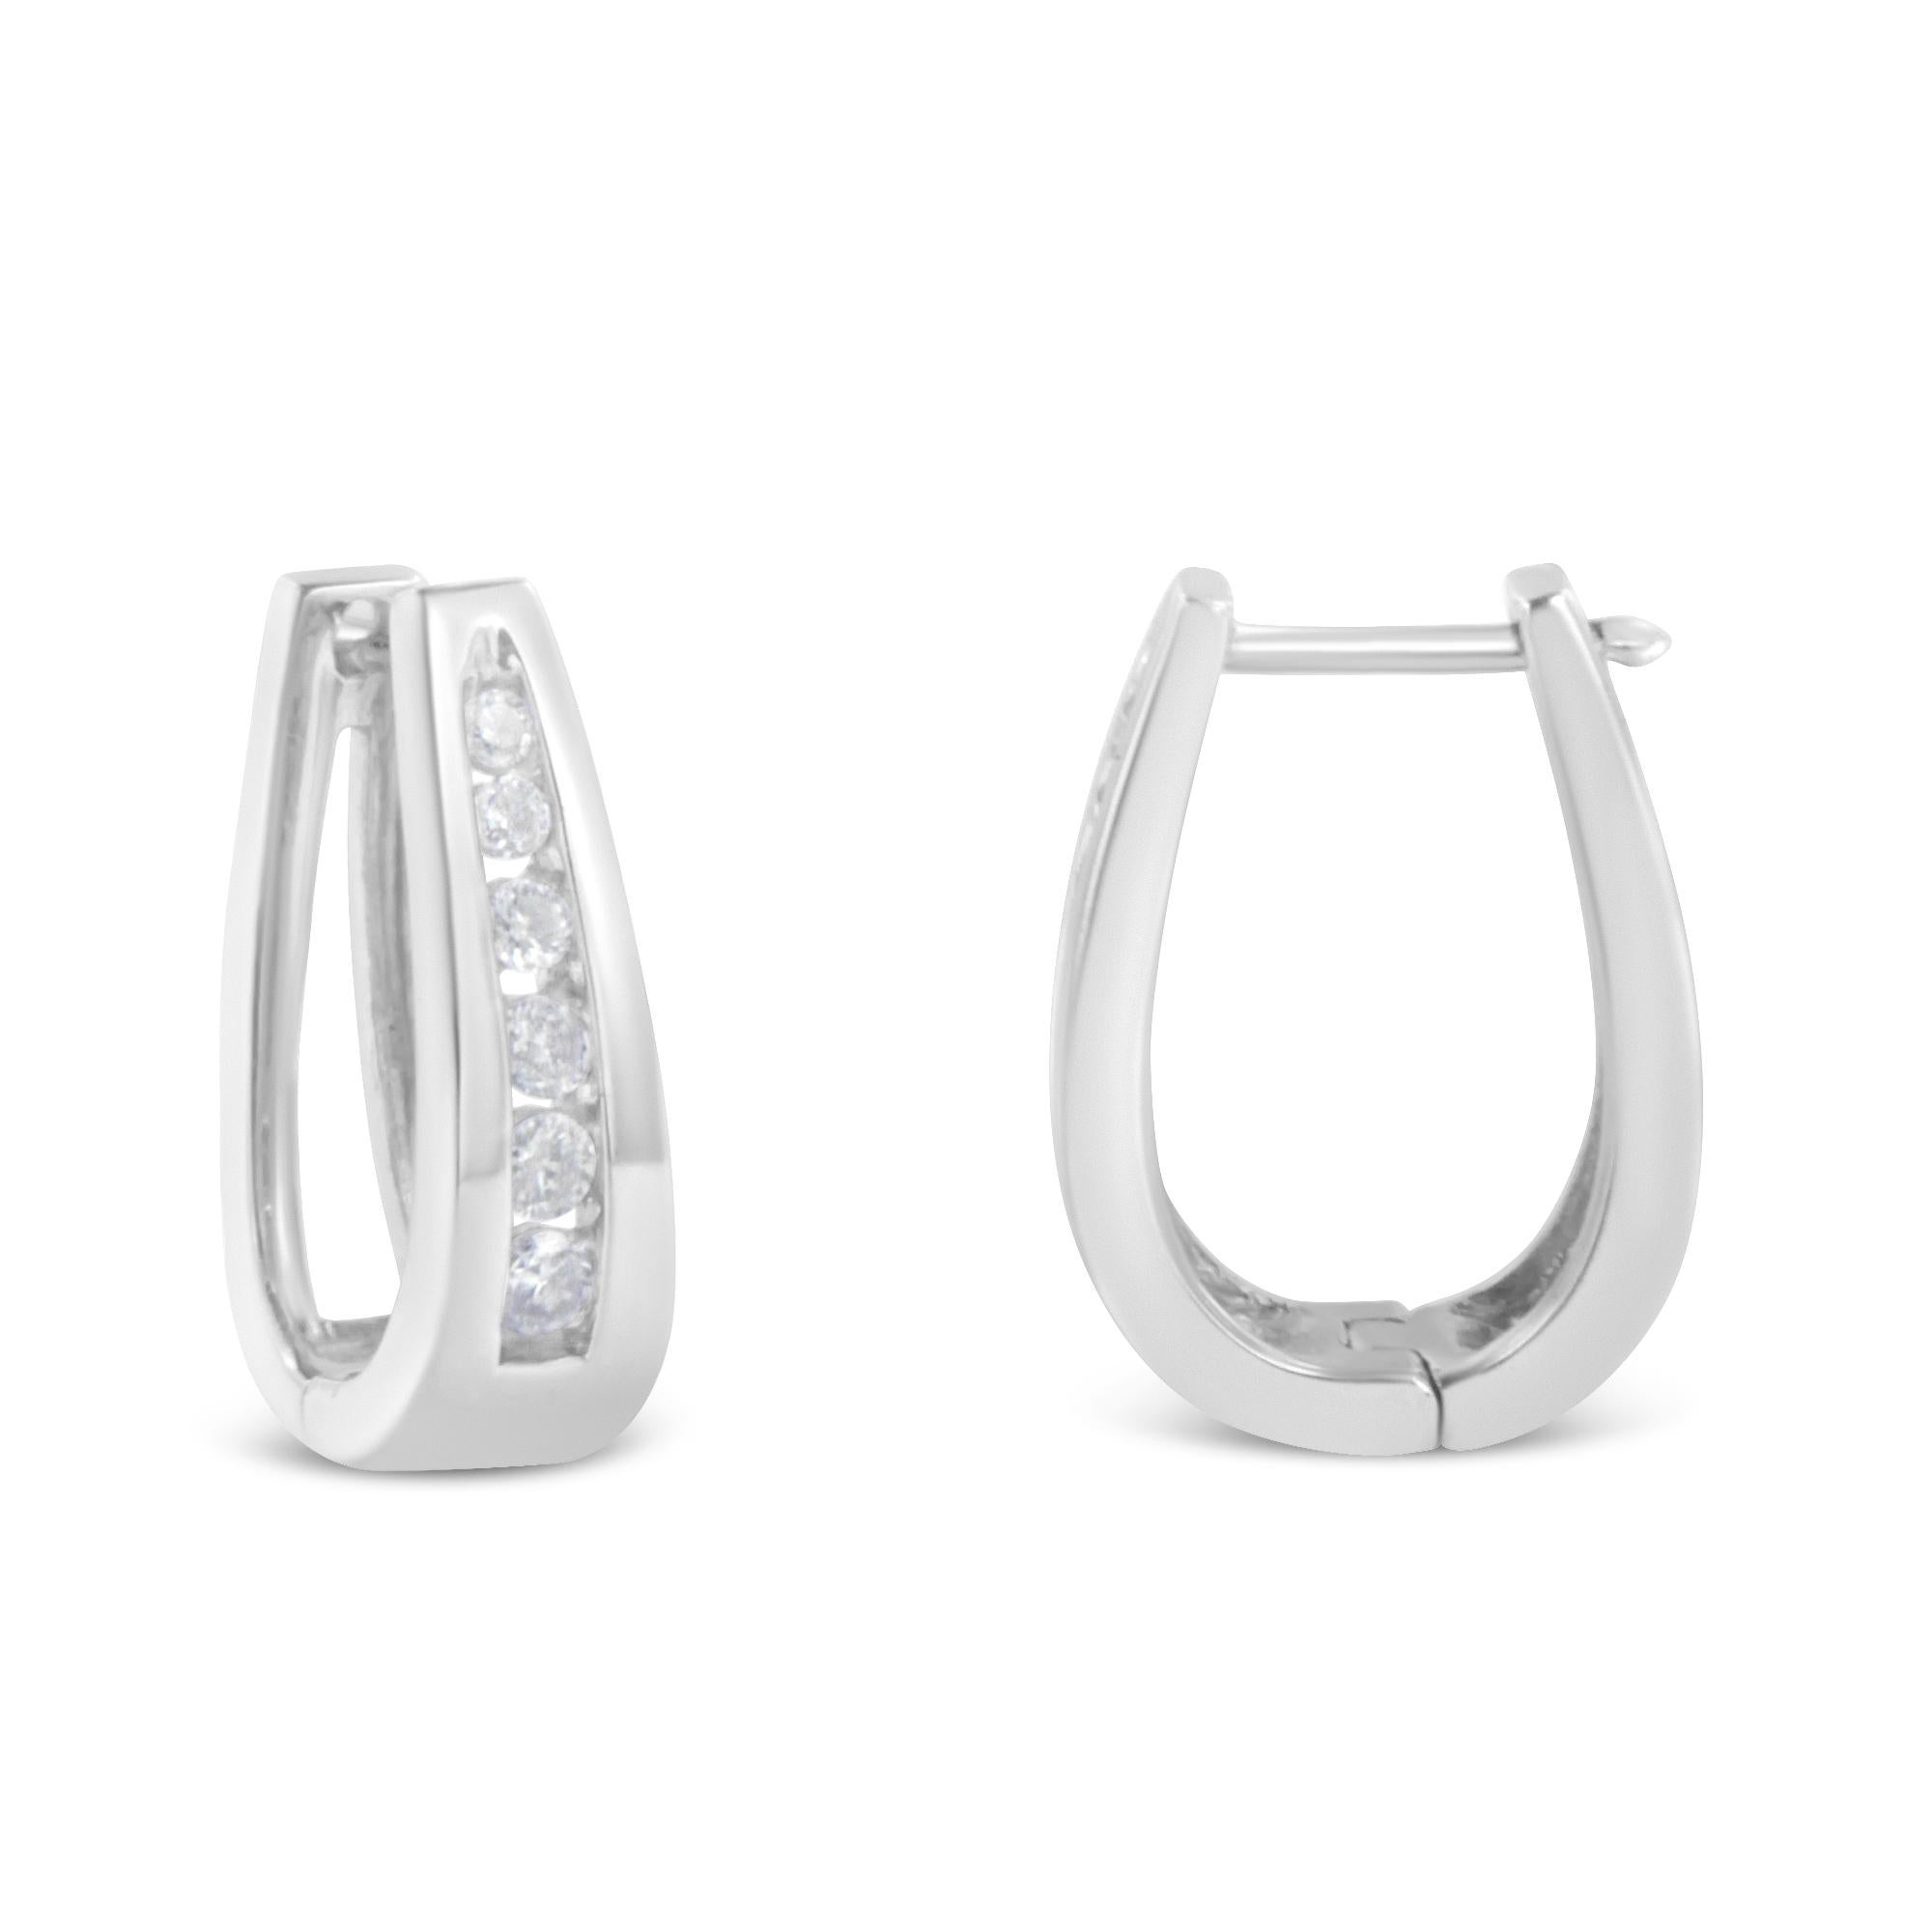 Fashioned in stunning 14k white gold, these beautiful hoop earrings feature 1/4ct of brilliant round cut diamonds in a channel setting that delicately flow half way around the outside of the hoop. A classic piece you can wear everyday. These